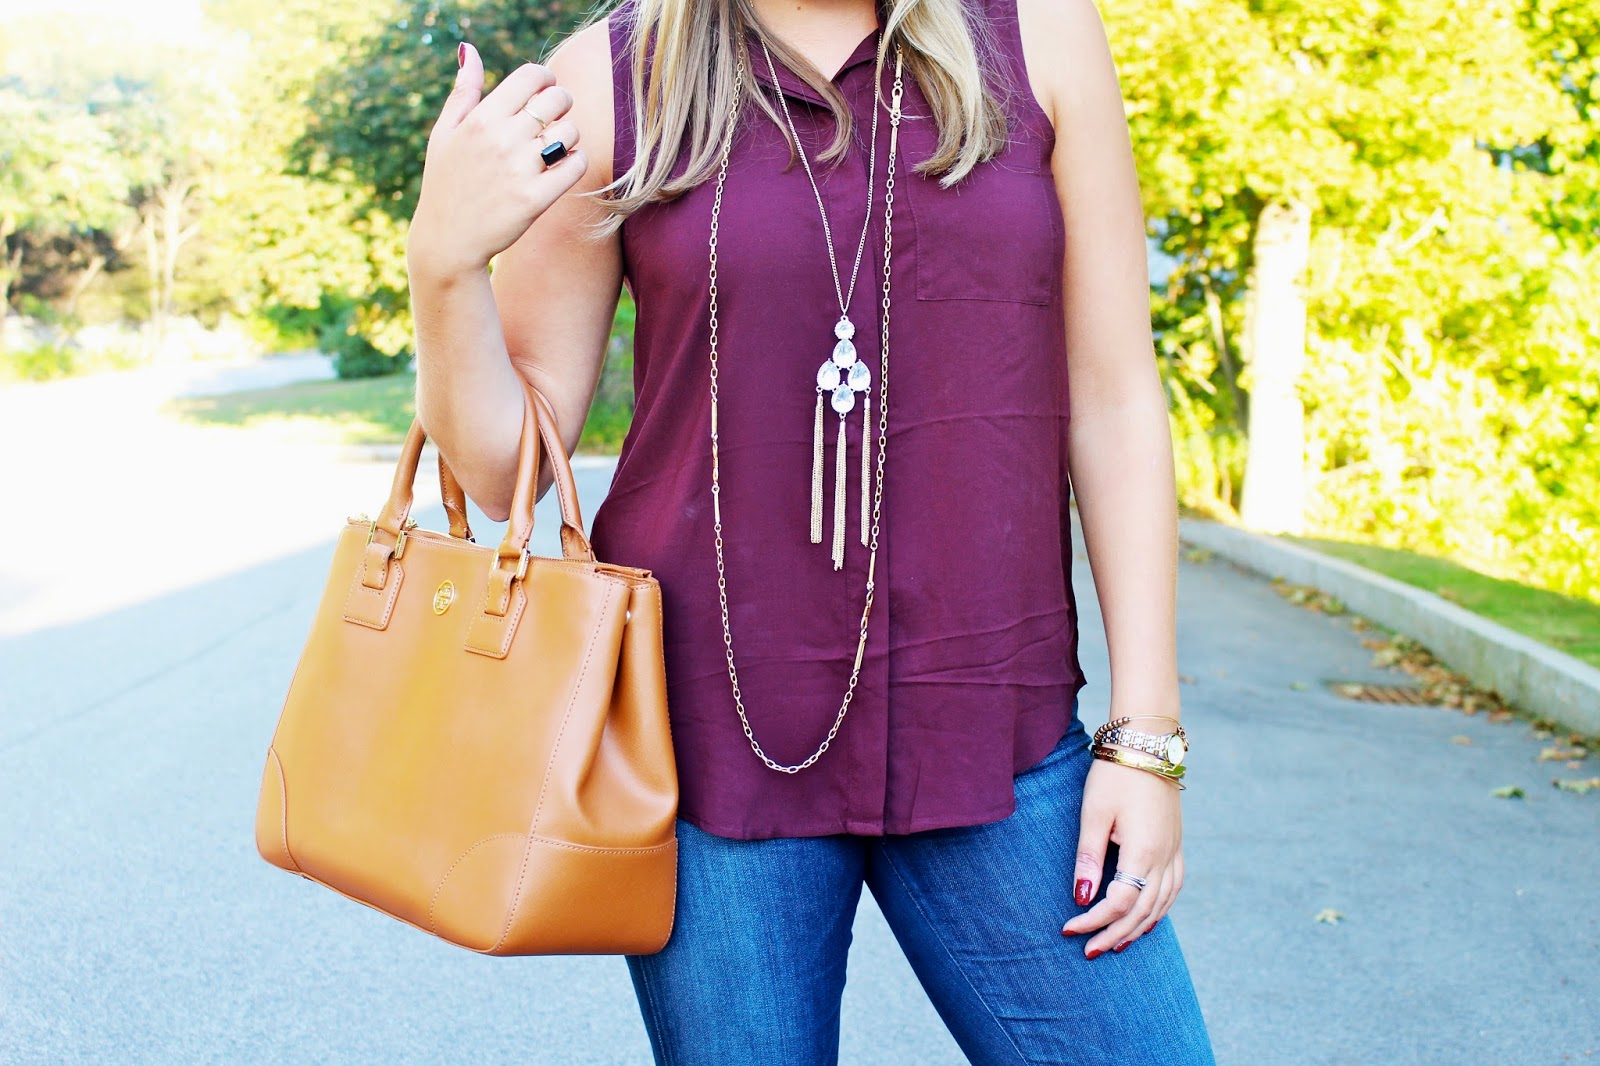 Style Cubby - Fashion and Lifestyle Blog Based in New England: Burgundy ...